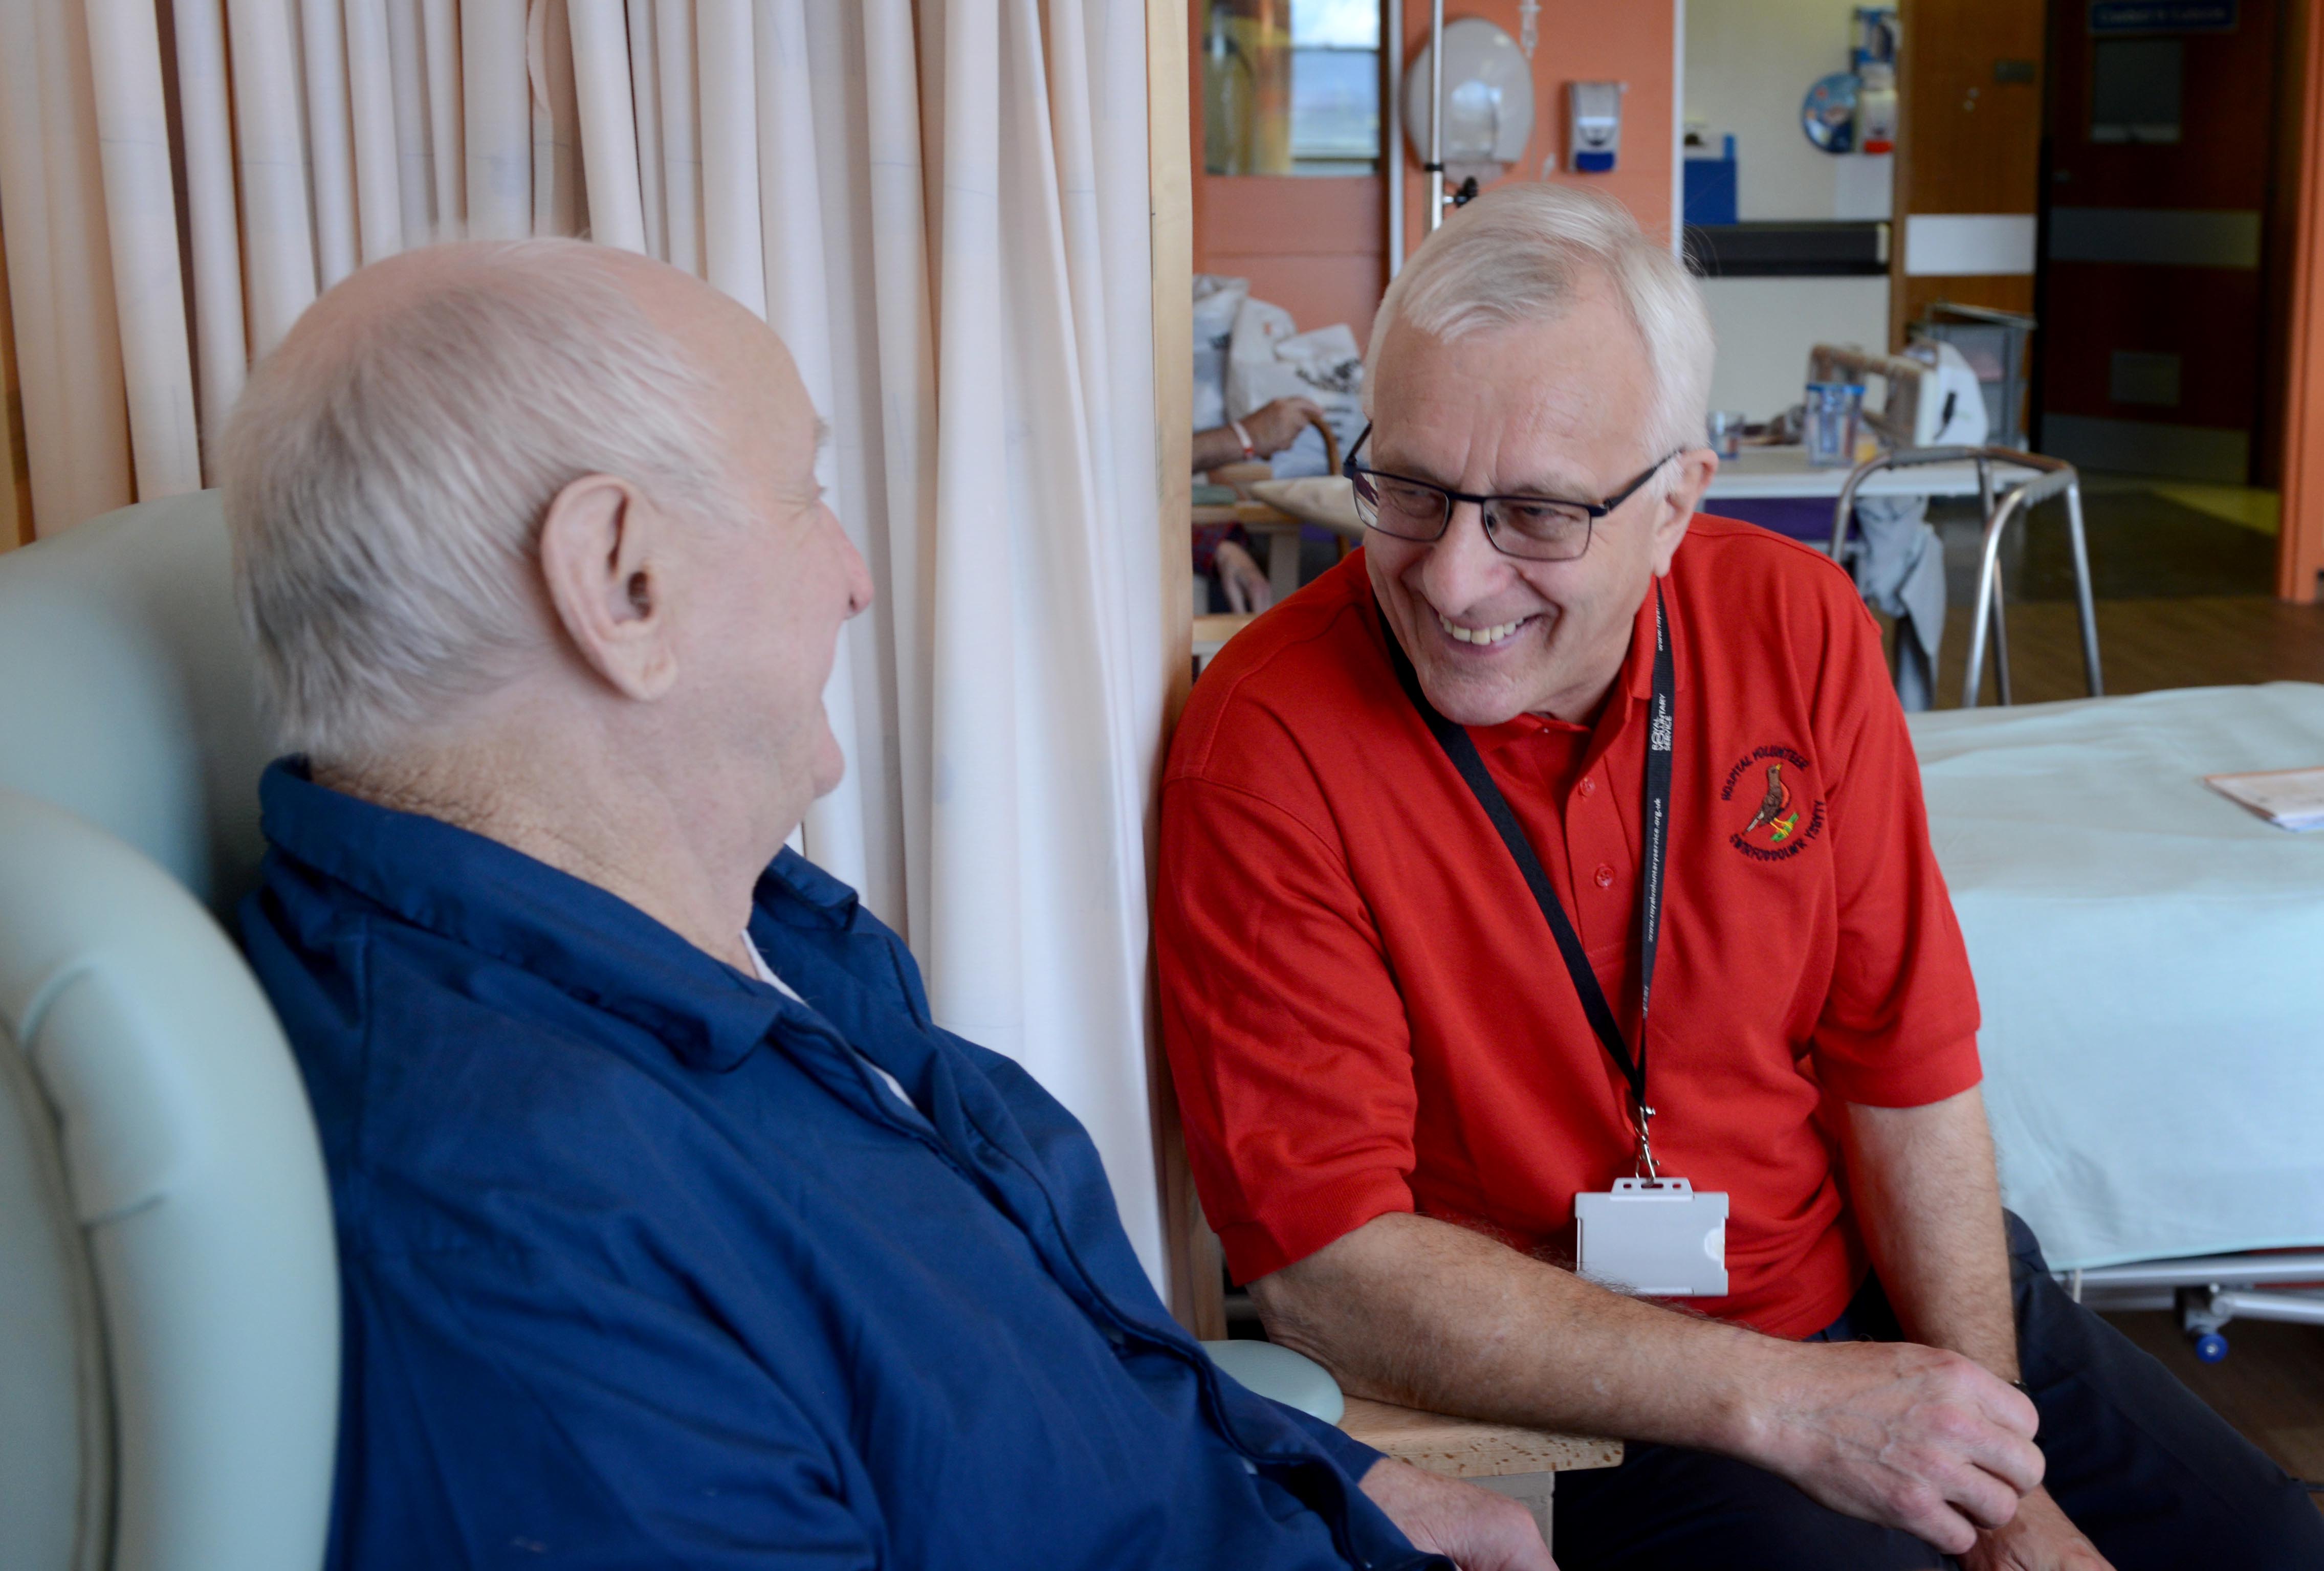 Pensioner Andy volunteers at hospital to say thanks to medics for saving his life